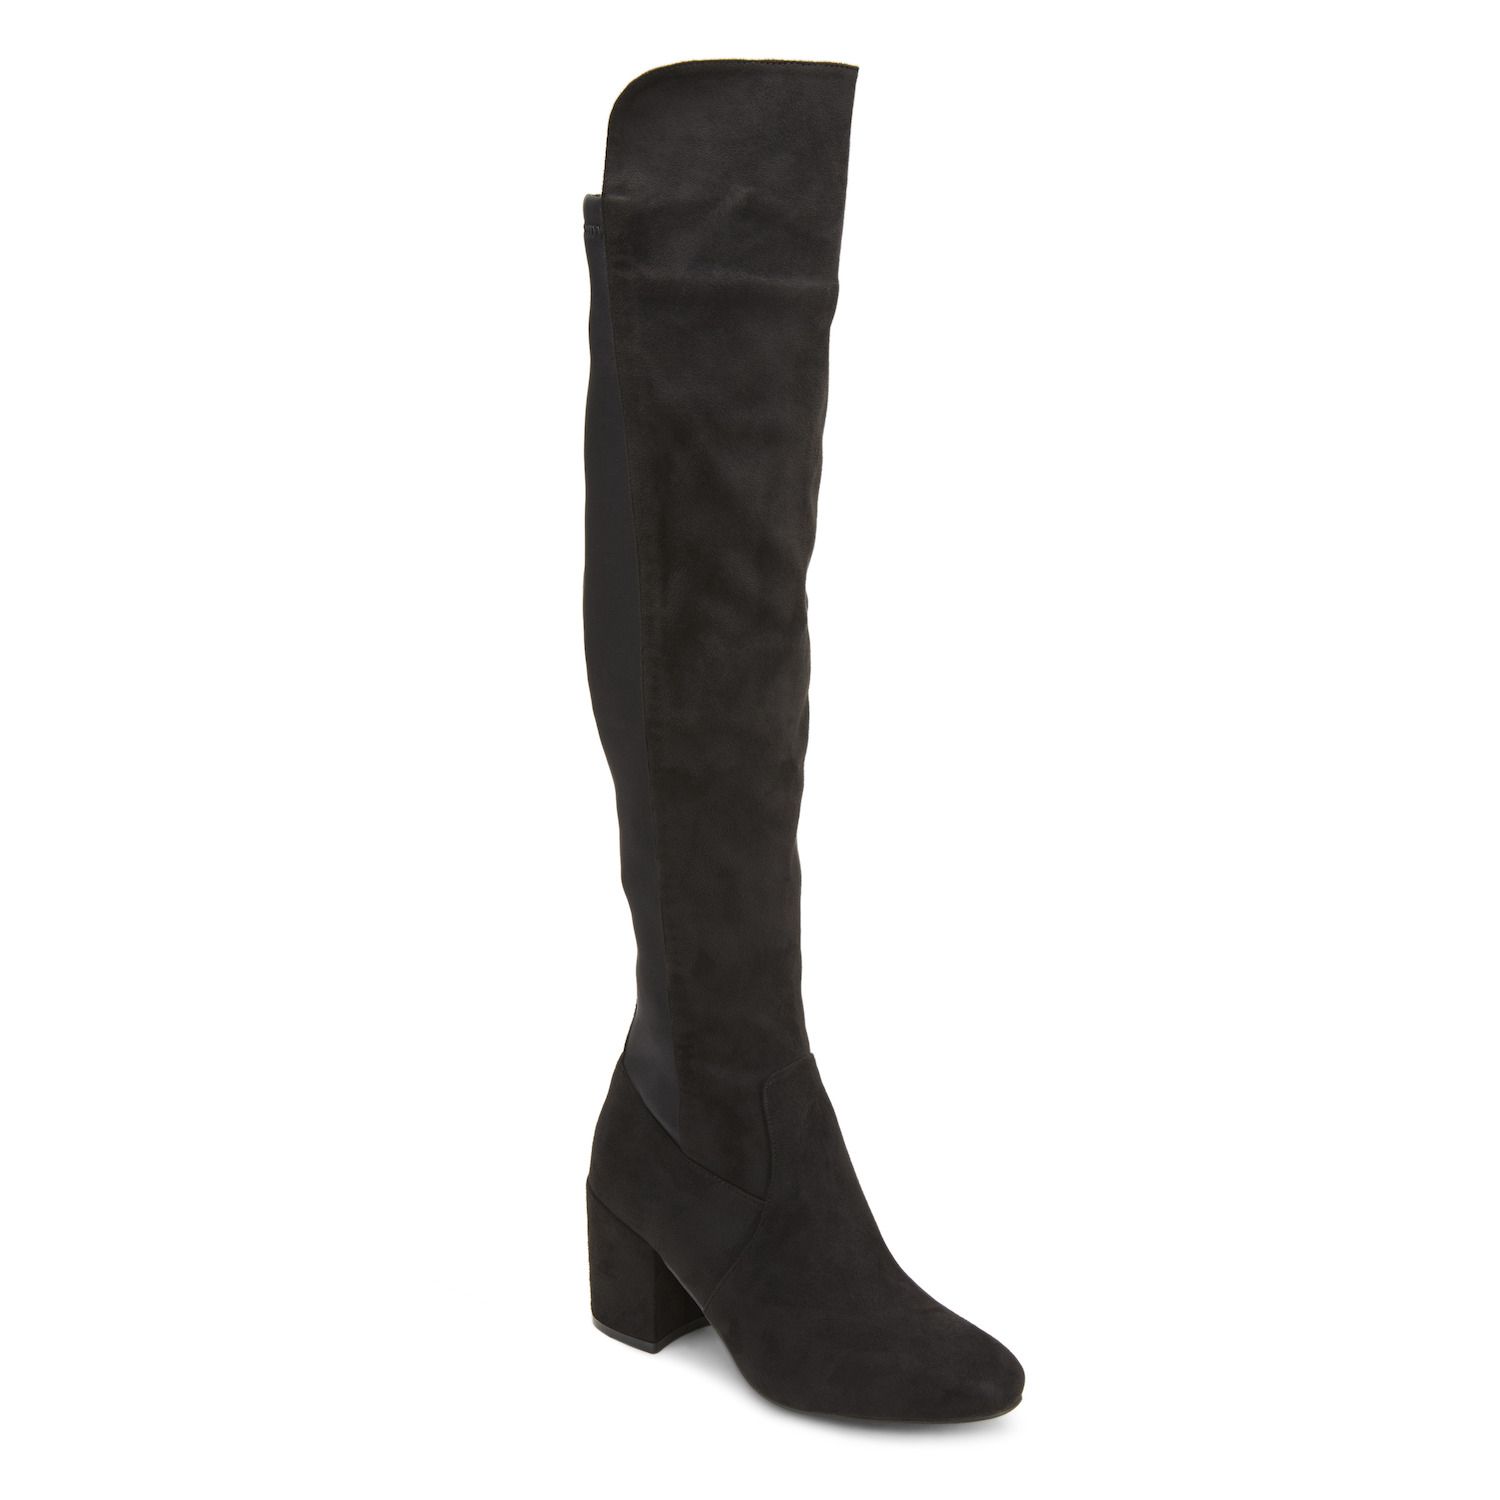 olivia miller over the knee boots